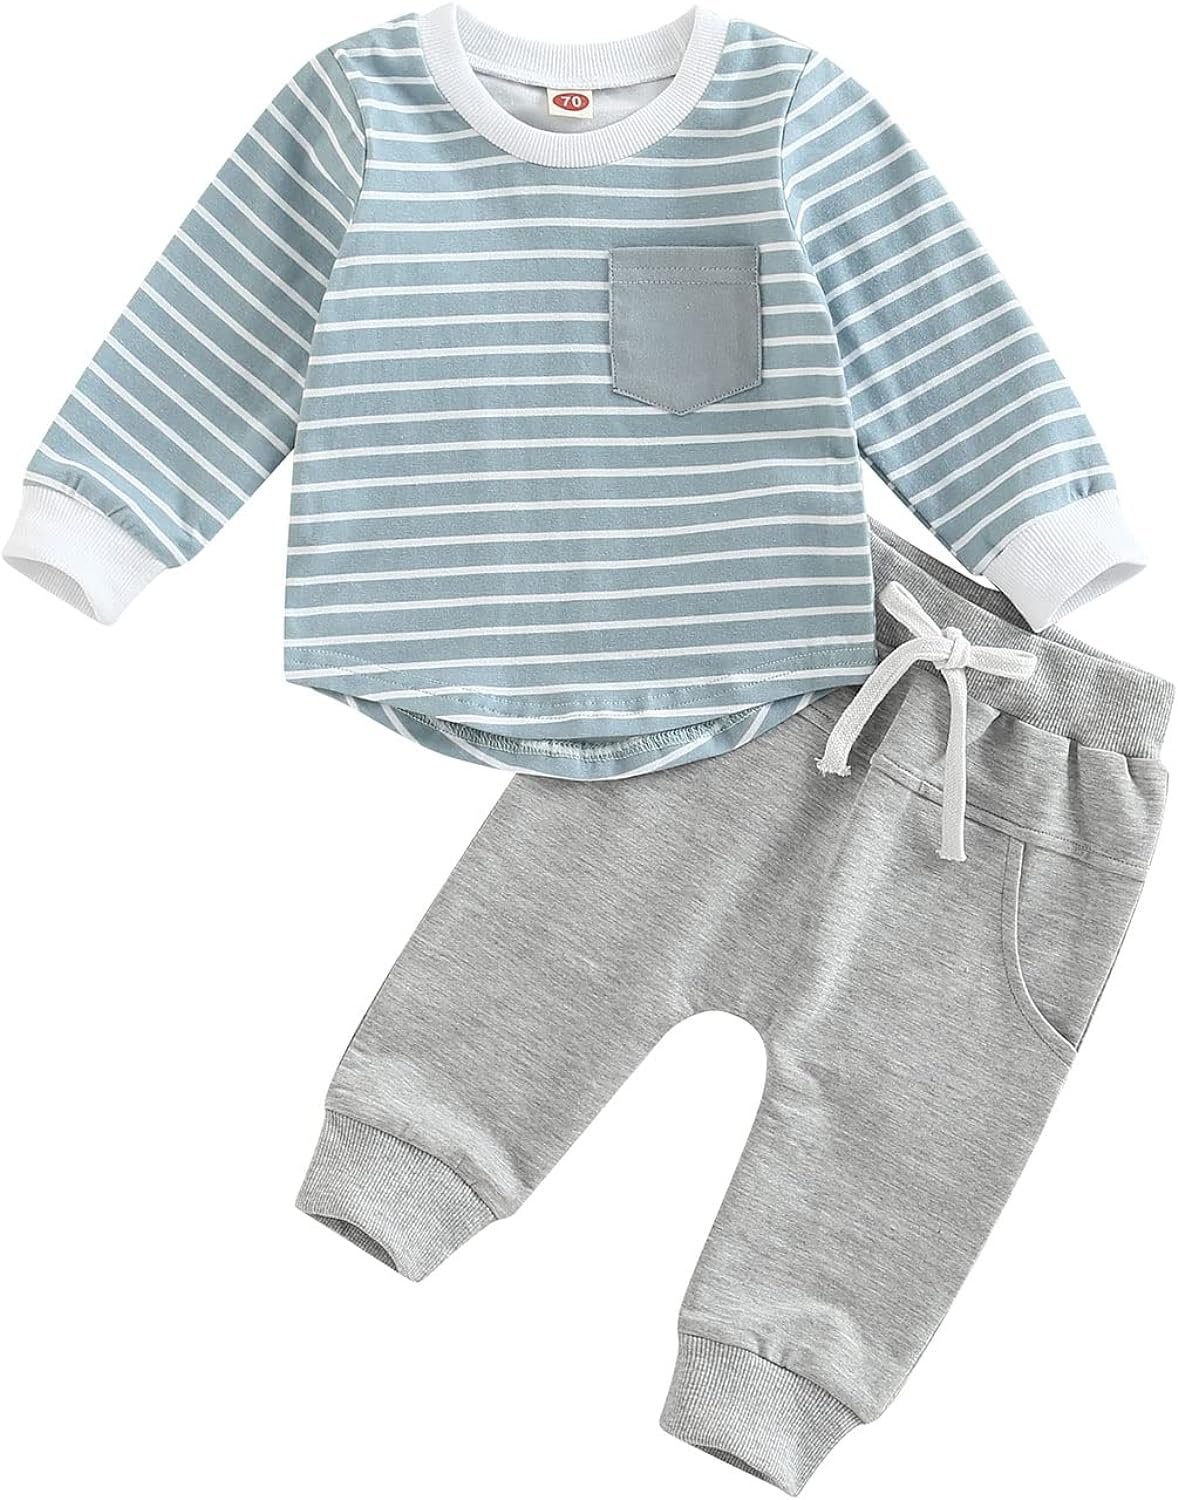 Toddler Baby Boy Clothes Long Sleeve Striped Crewneck T-Shirt Top + Solid Drawstring Pants Set Infant Fall Outfits